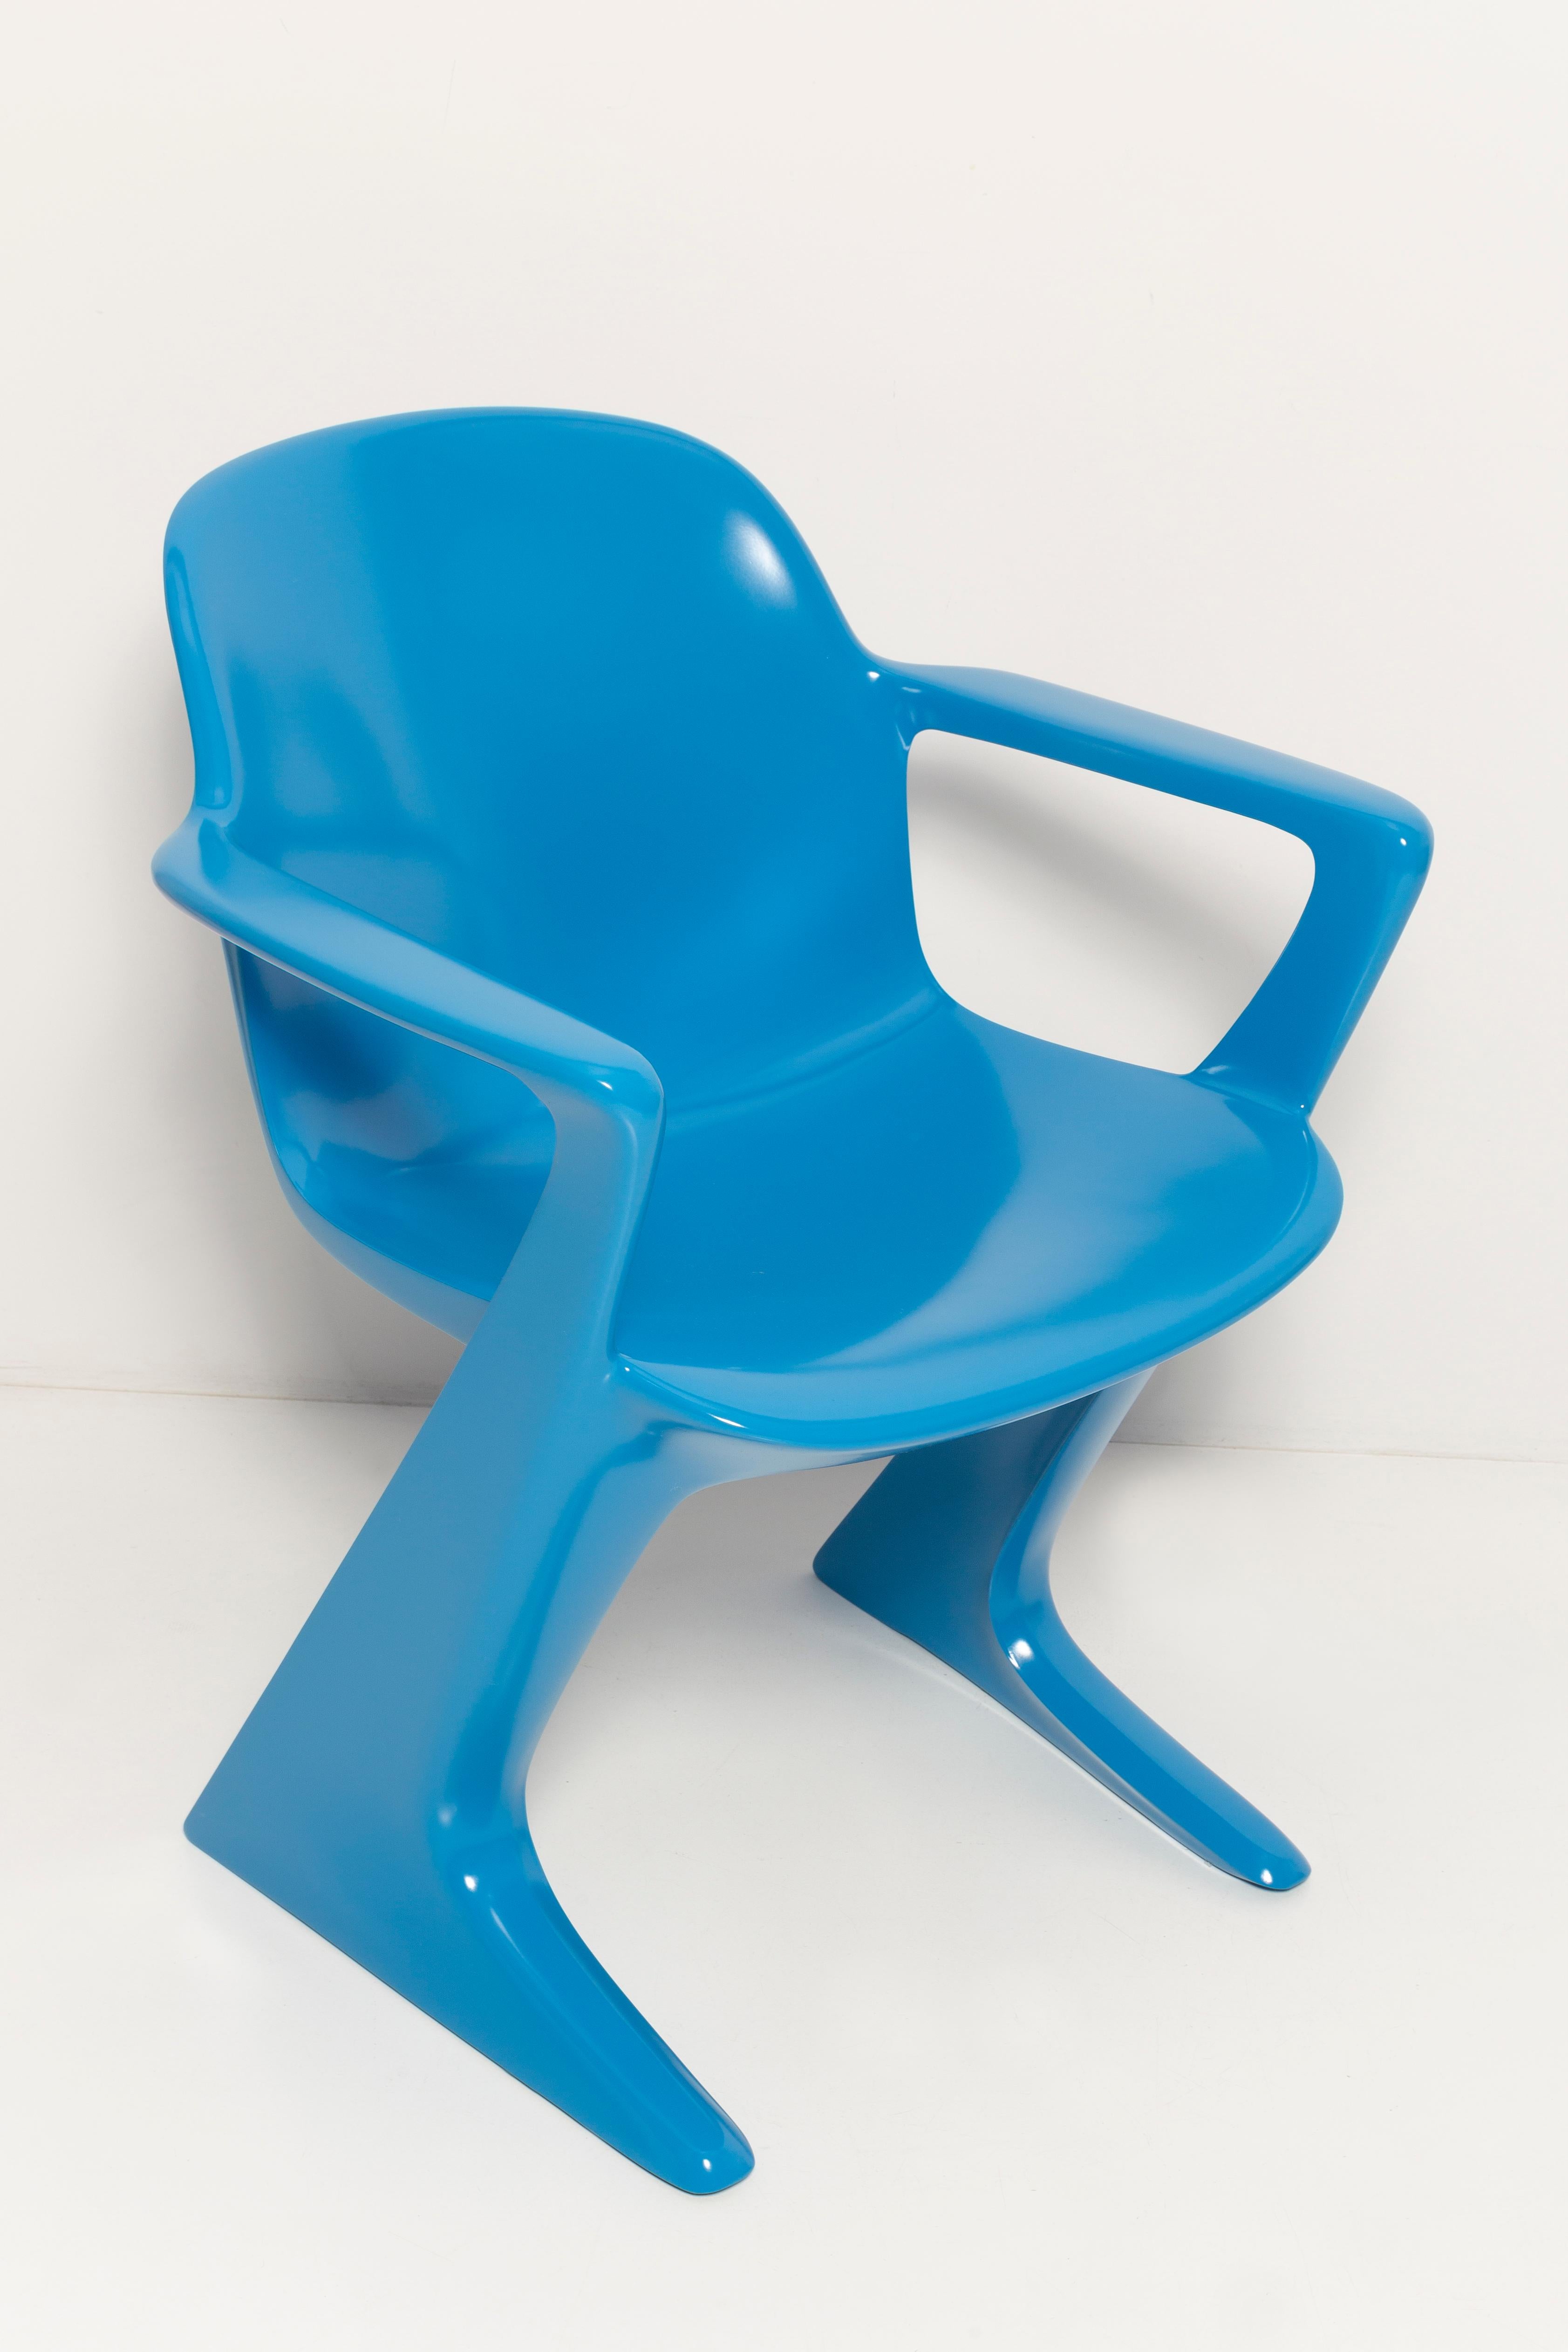 Lacquered Set of Four Blue Kangaroo Chairs Designed by Ernst Moeckl, Germany, 1960s For Sale